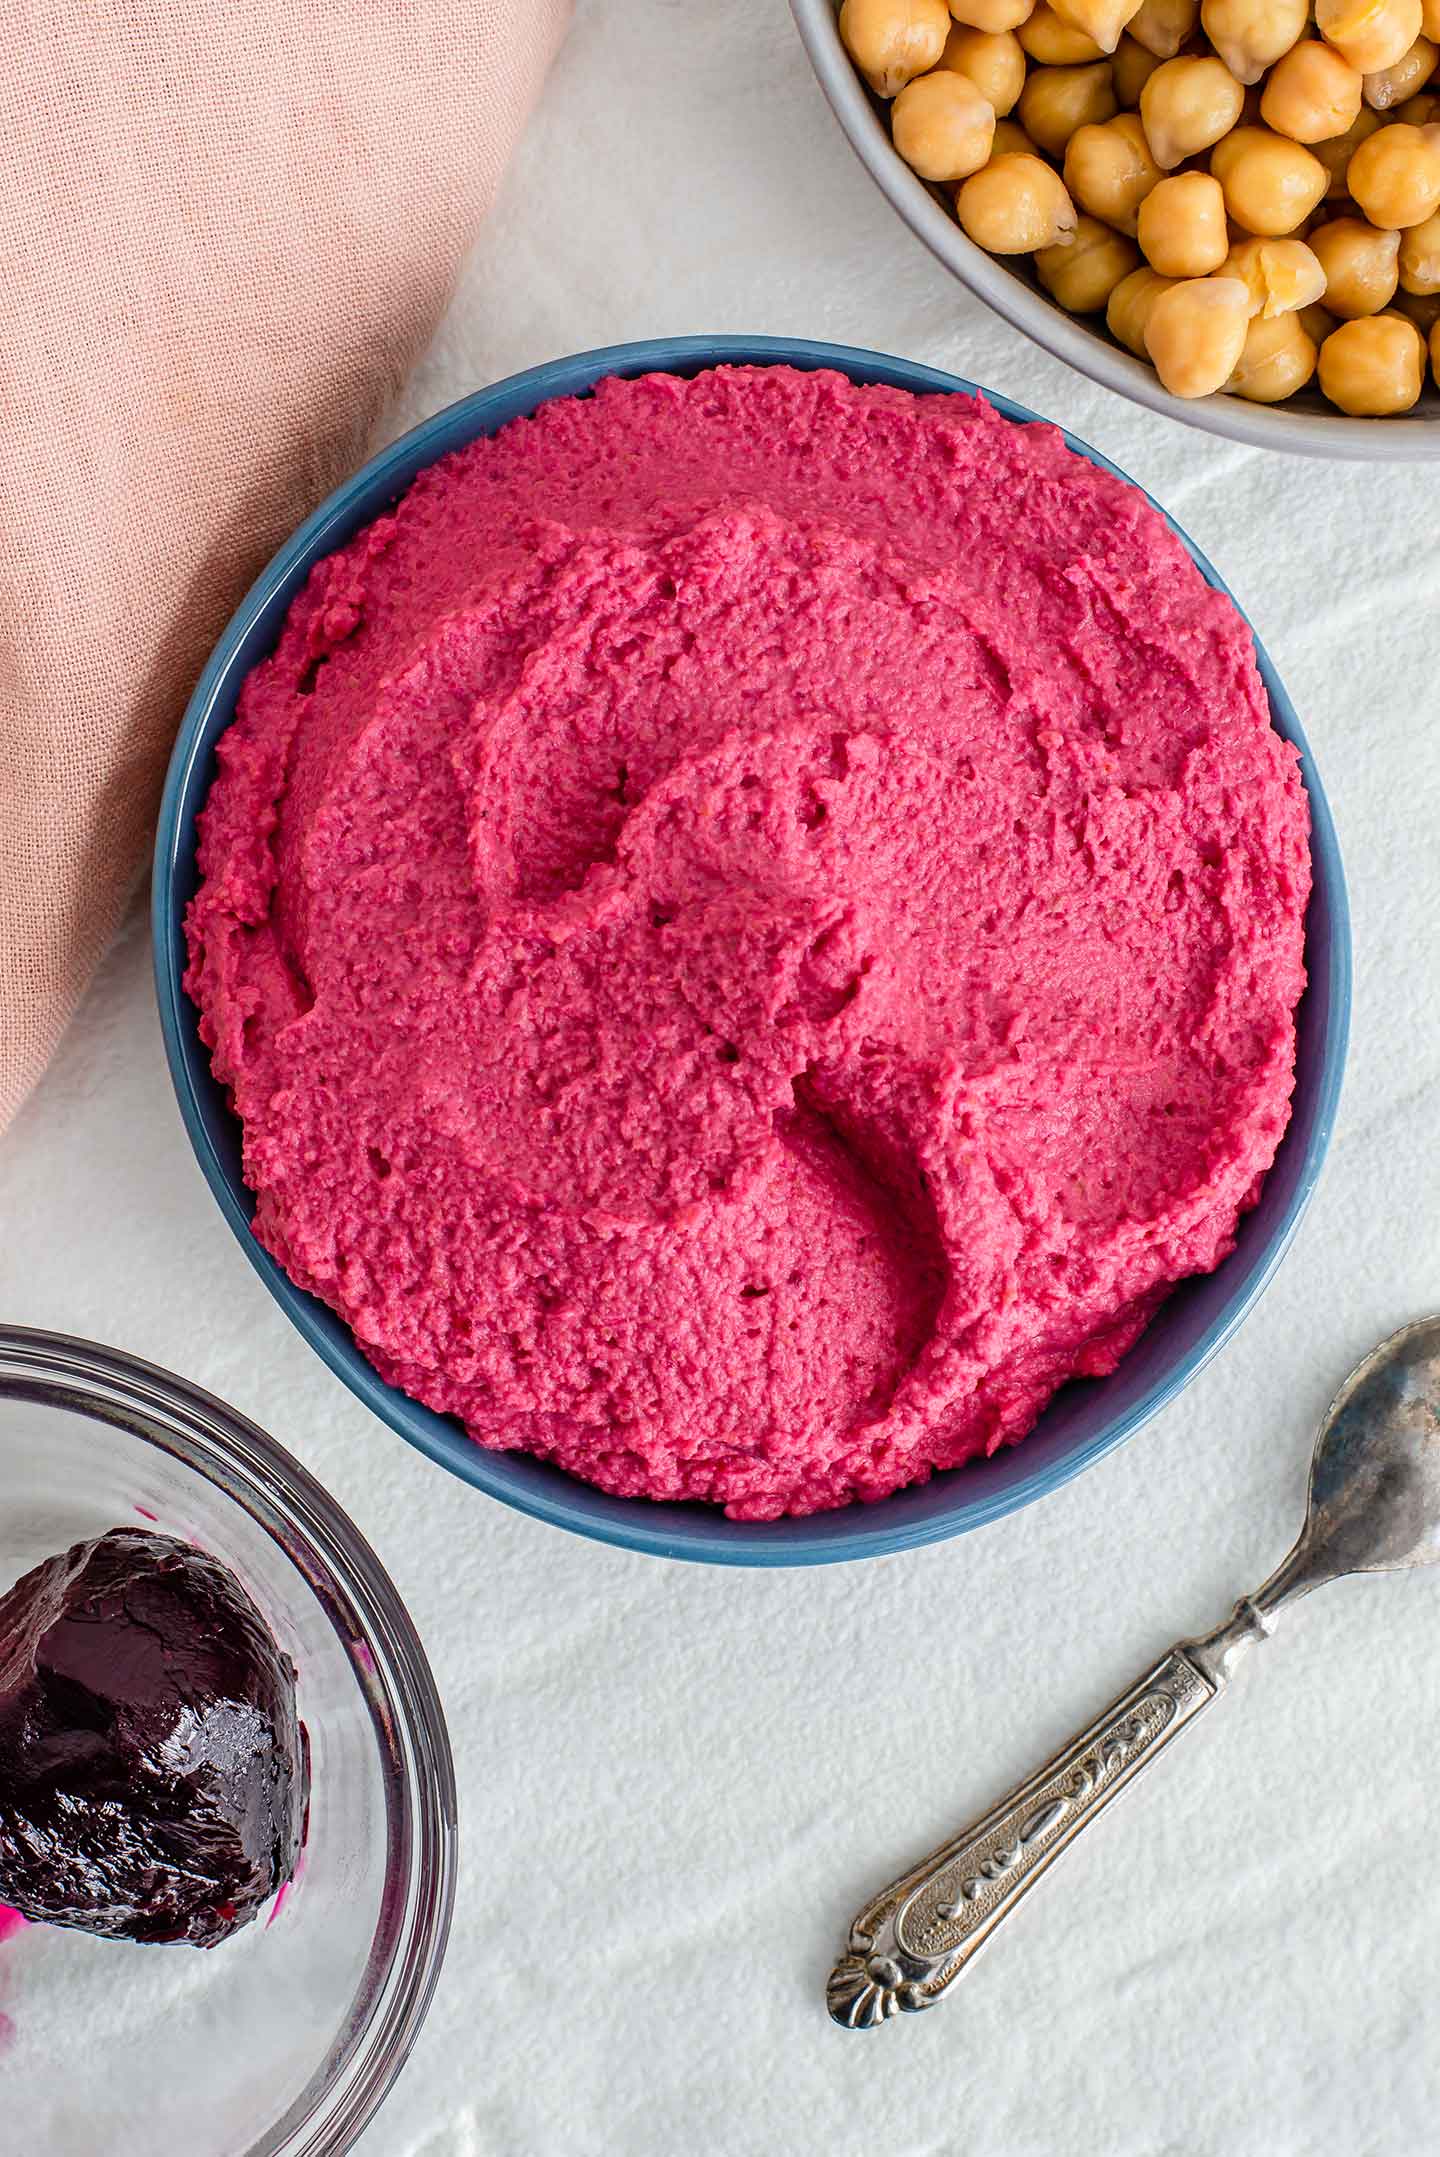 Top down view of beet hummus in a bowl. Cooked chickpeas and a roasted beet fill bowls on either side of the dip.